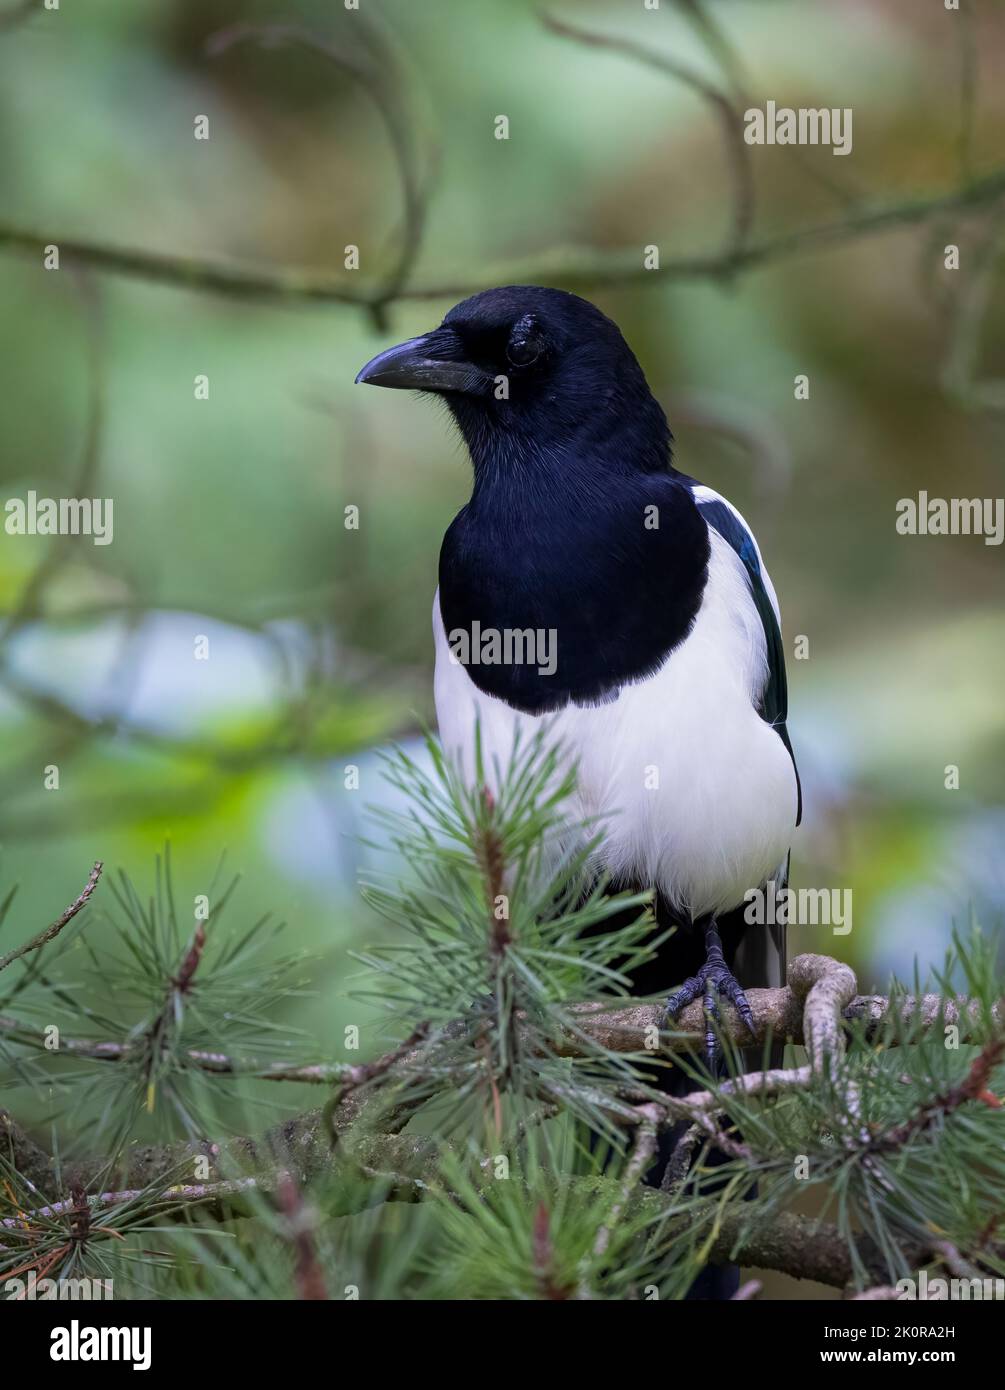 A beautiful Magpie, (Pica pica), perched on a Pine branch Stock Photo